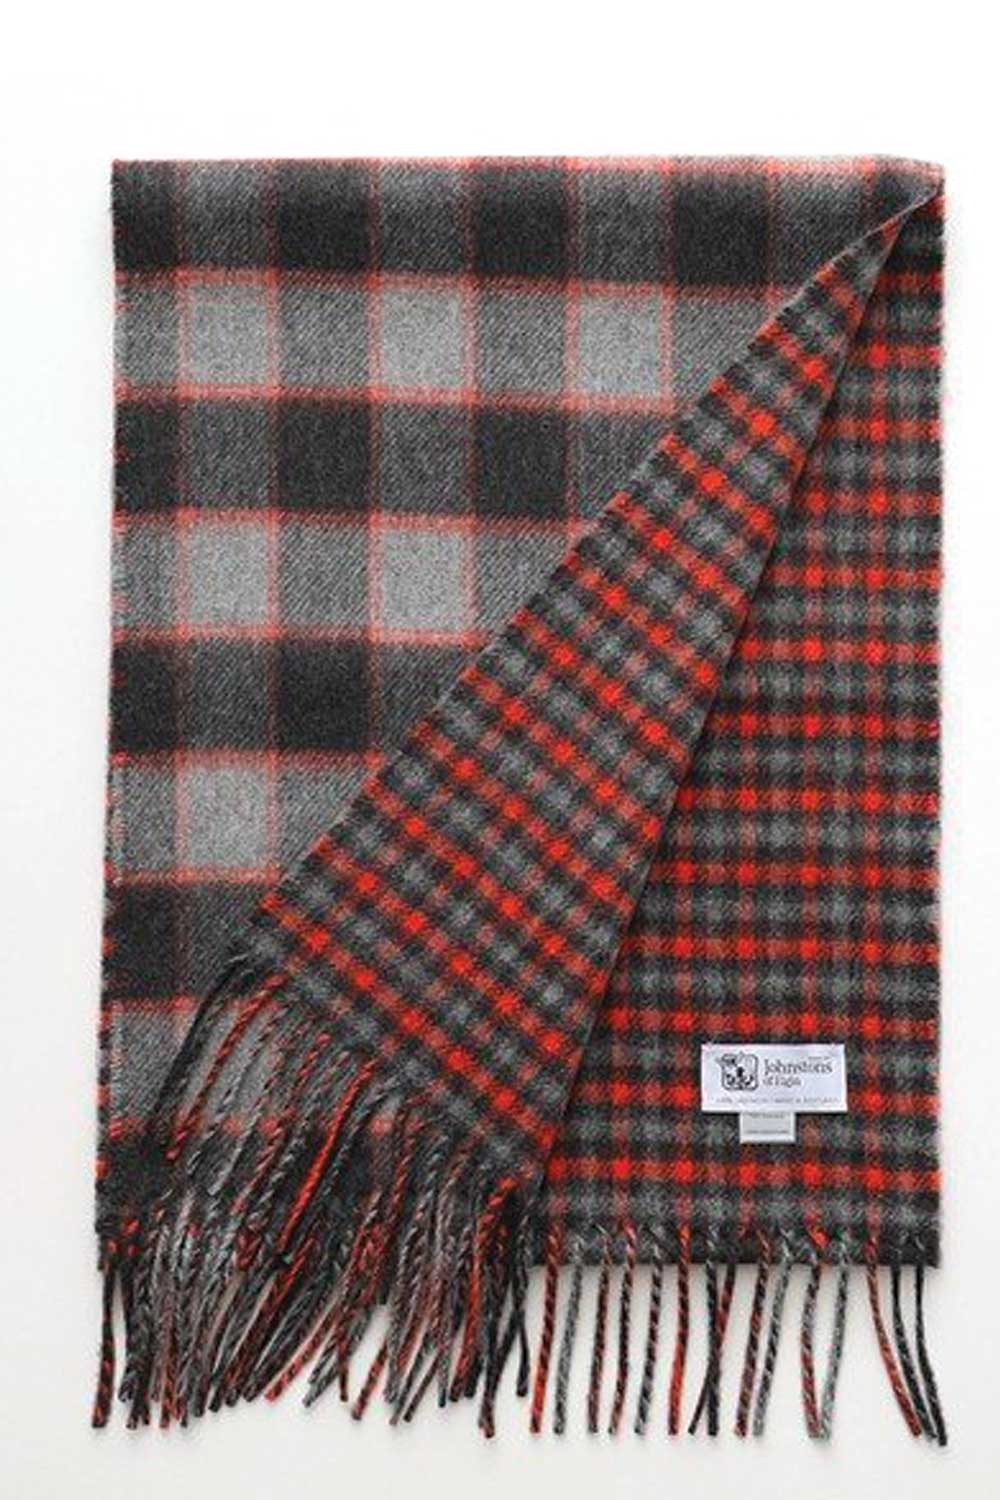 Cashmere Reversible Scarf